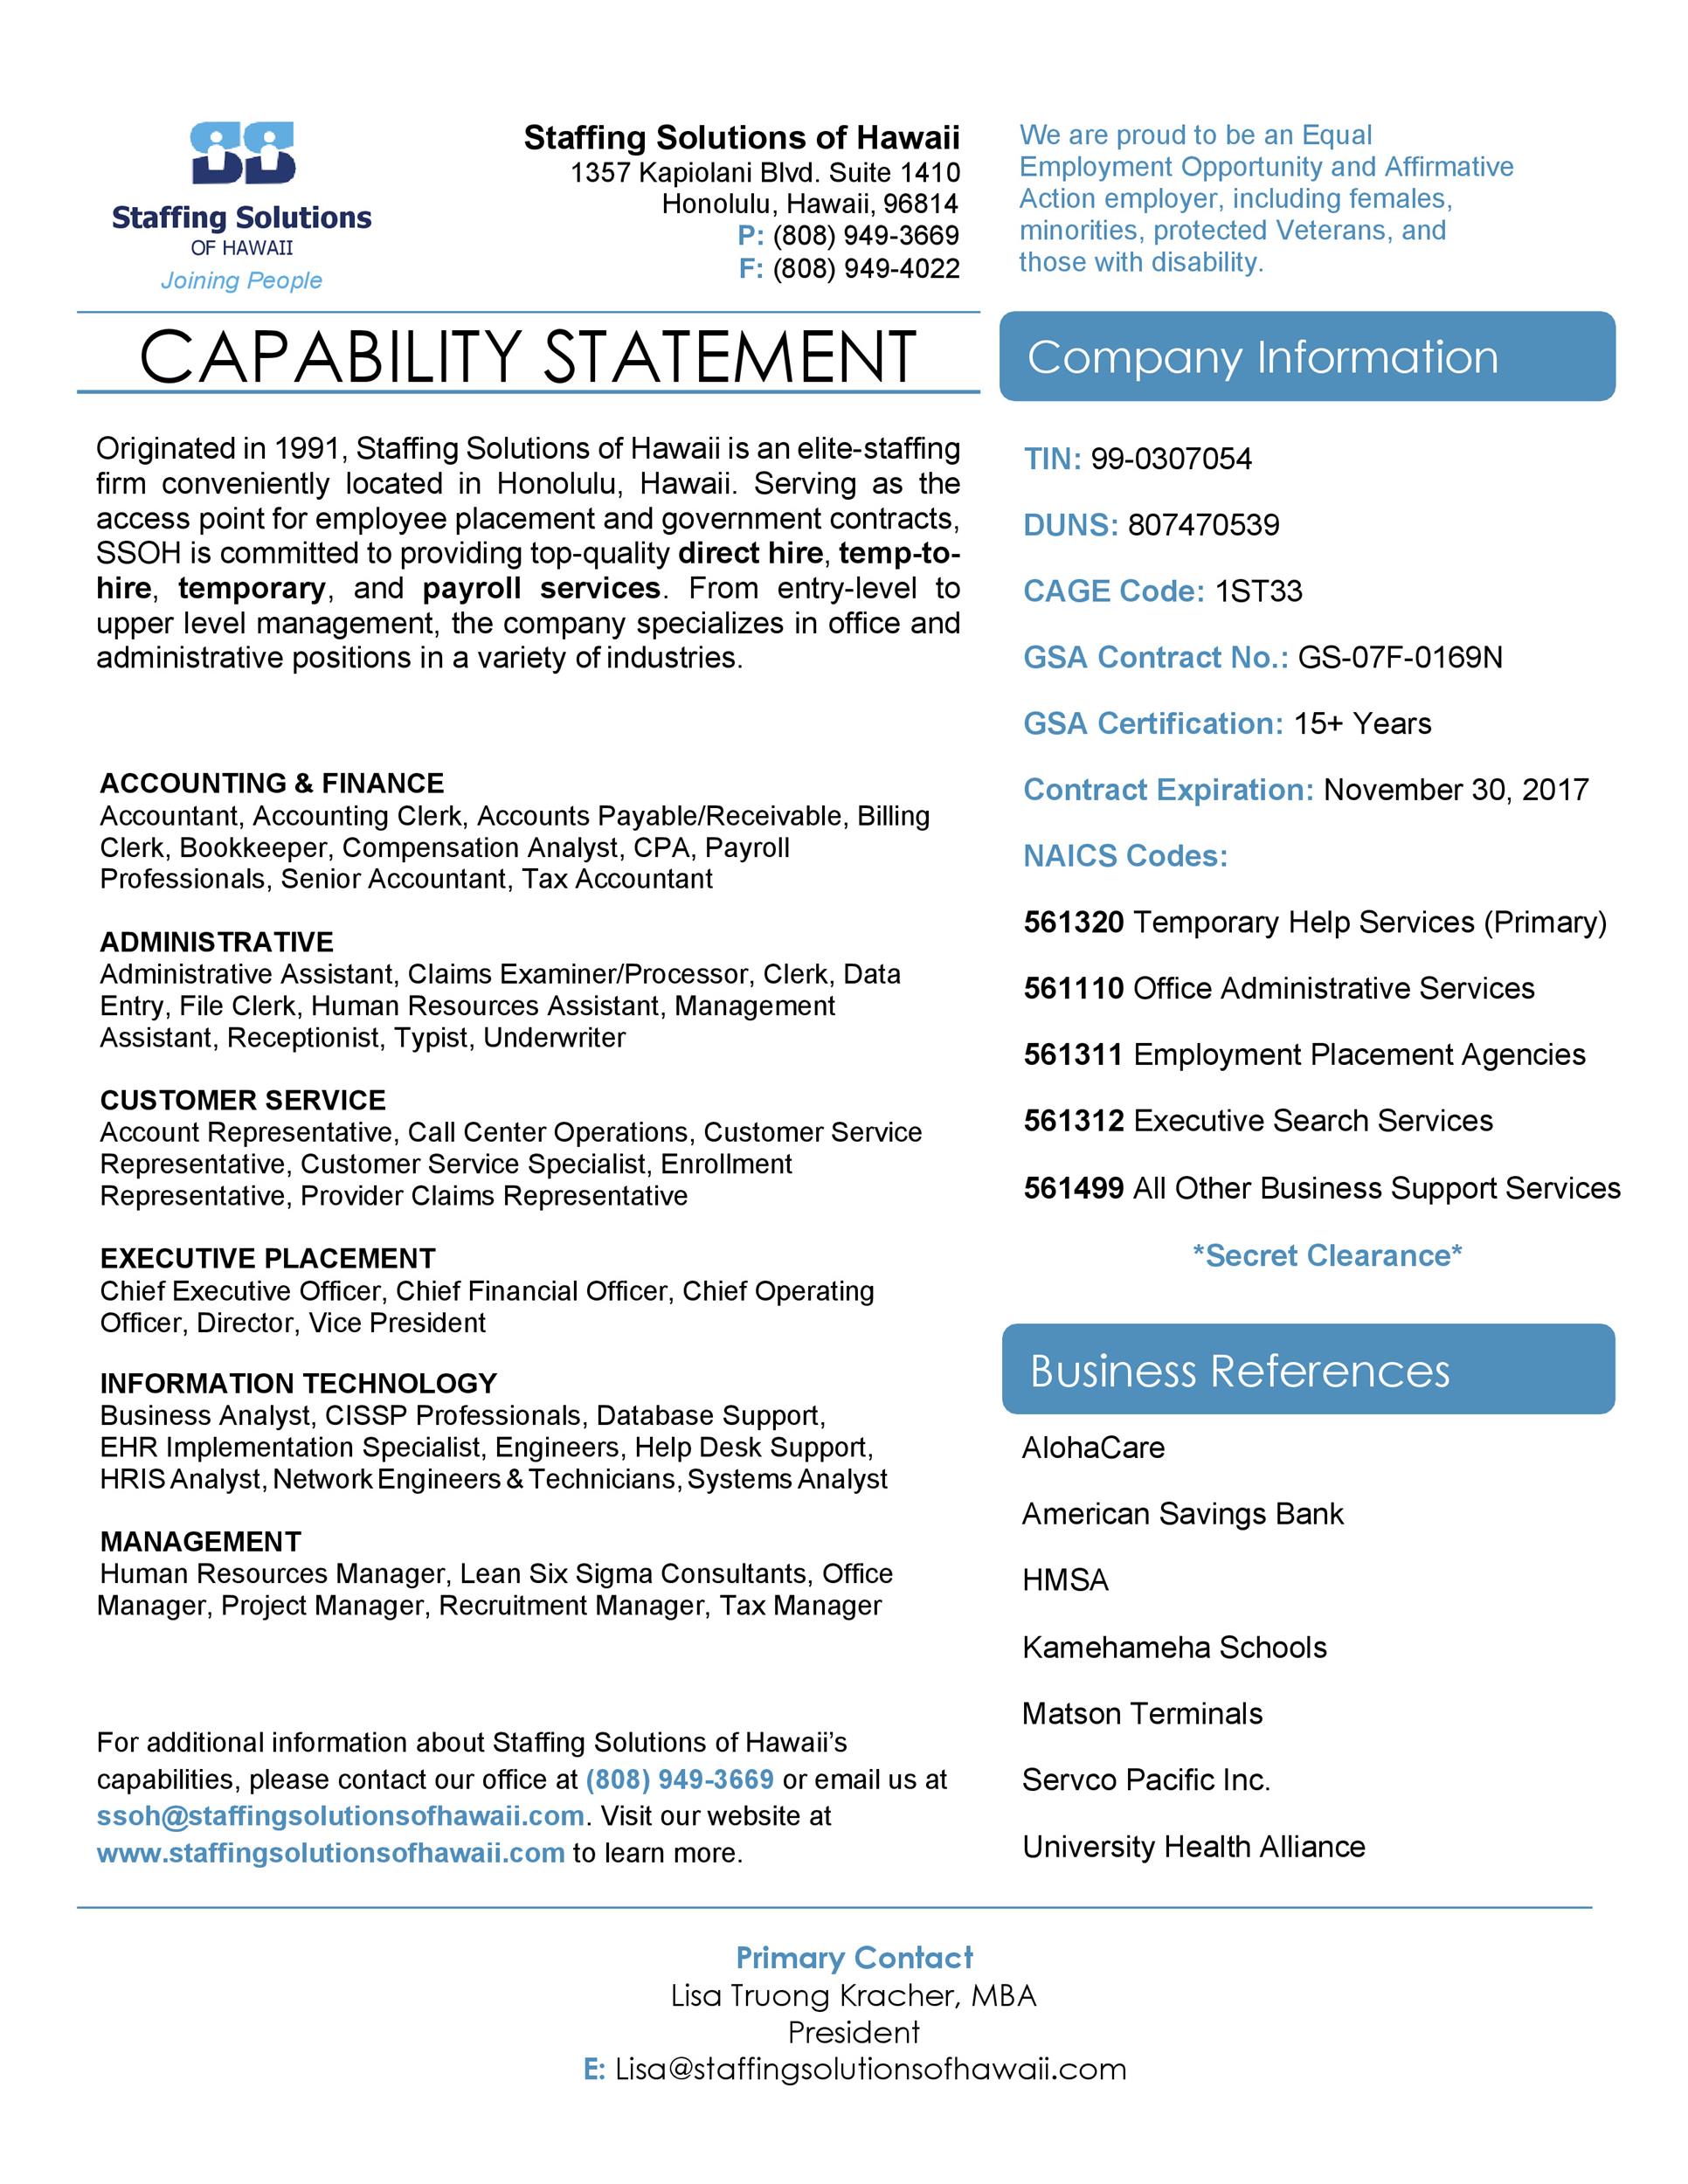 Capability Statement Template Free Printable Templates